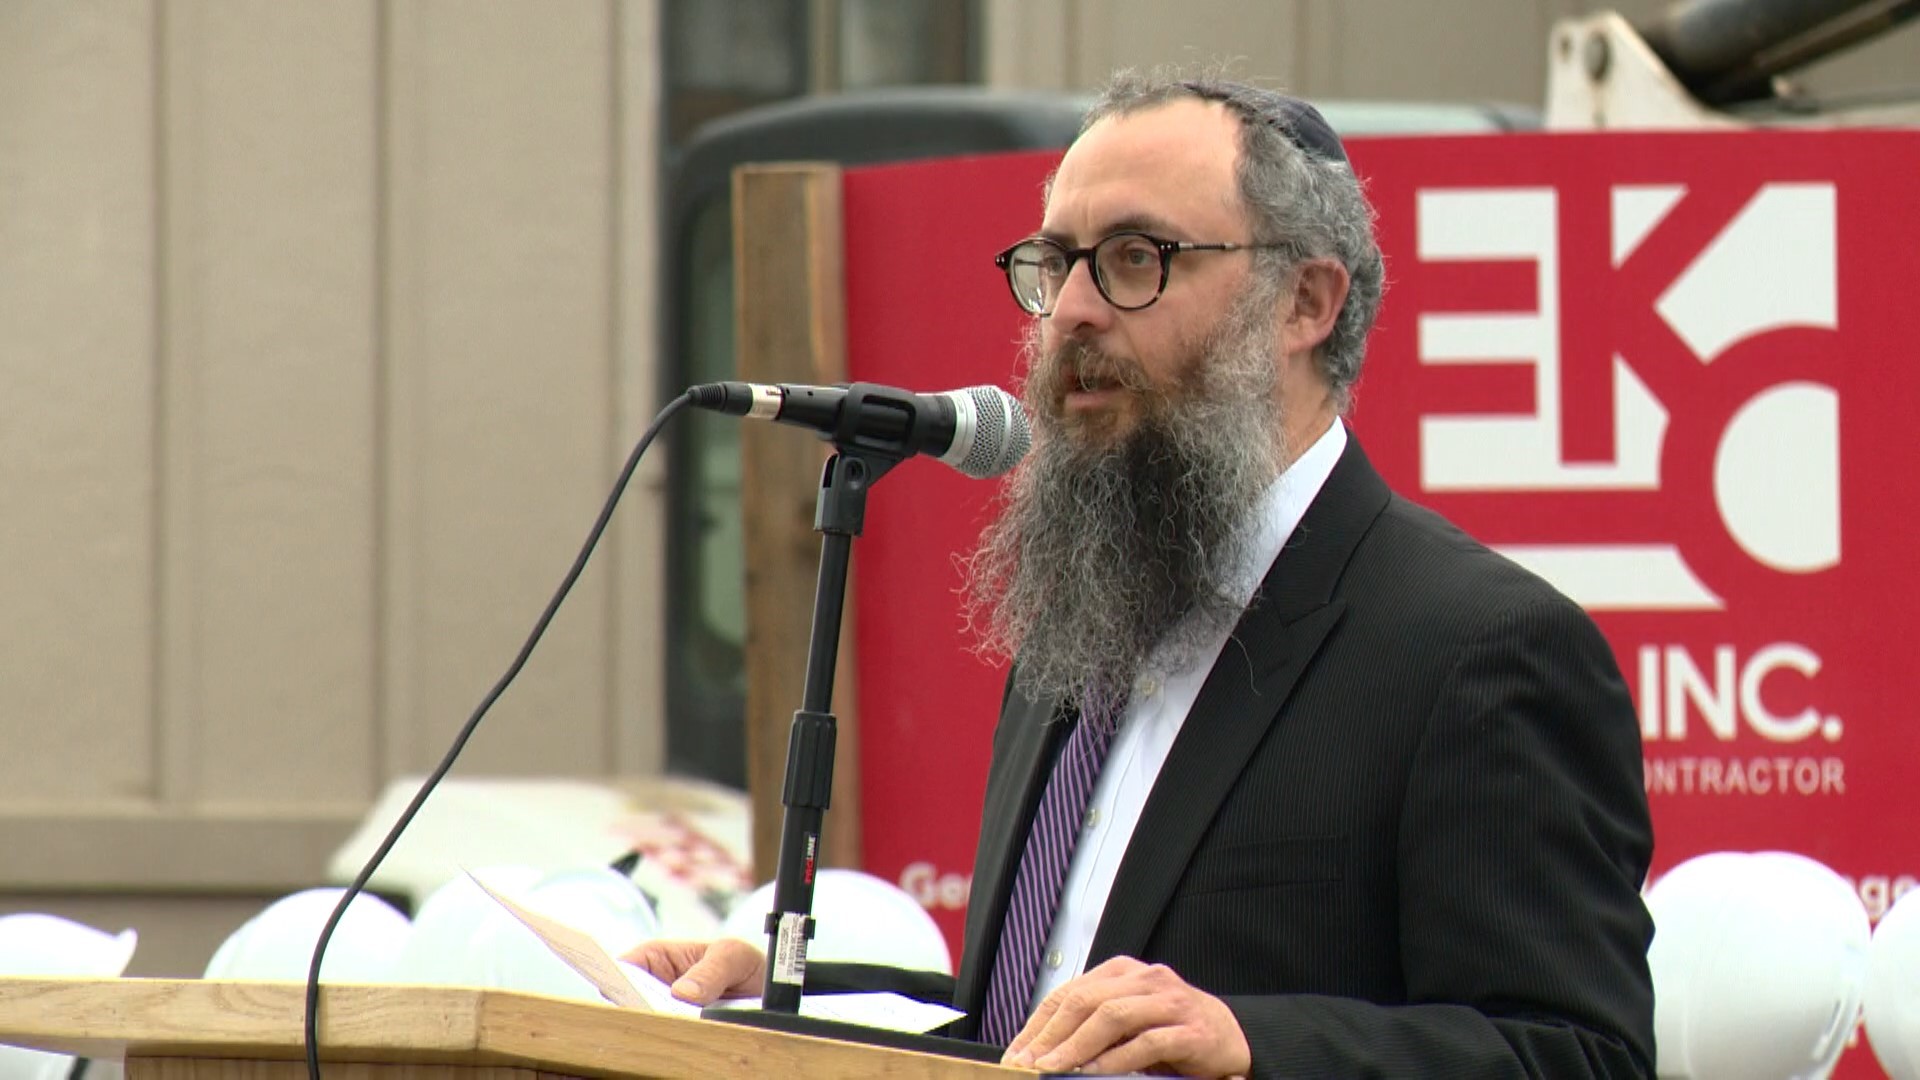 "We've seen the landscape of Judaism change over the last 18 years, and Boise has arrived. Now we need to rise to the occasion," Rabbi Mendel Lifshitz said.